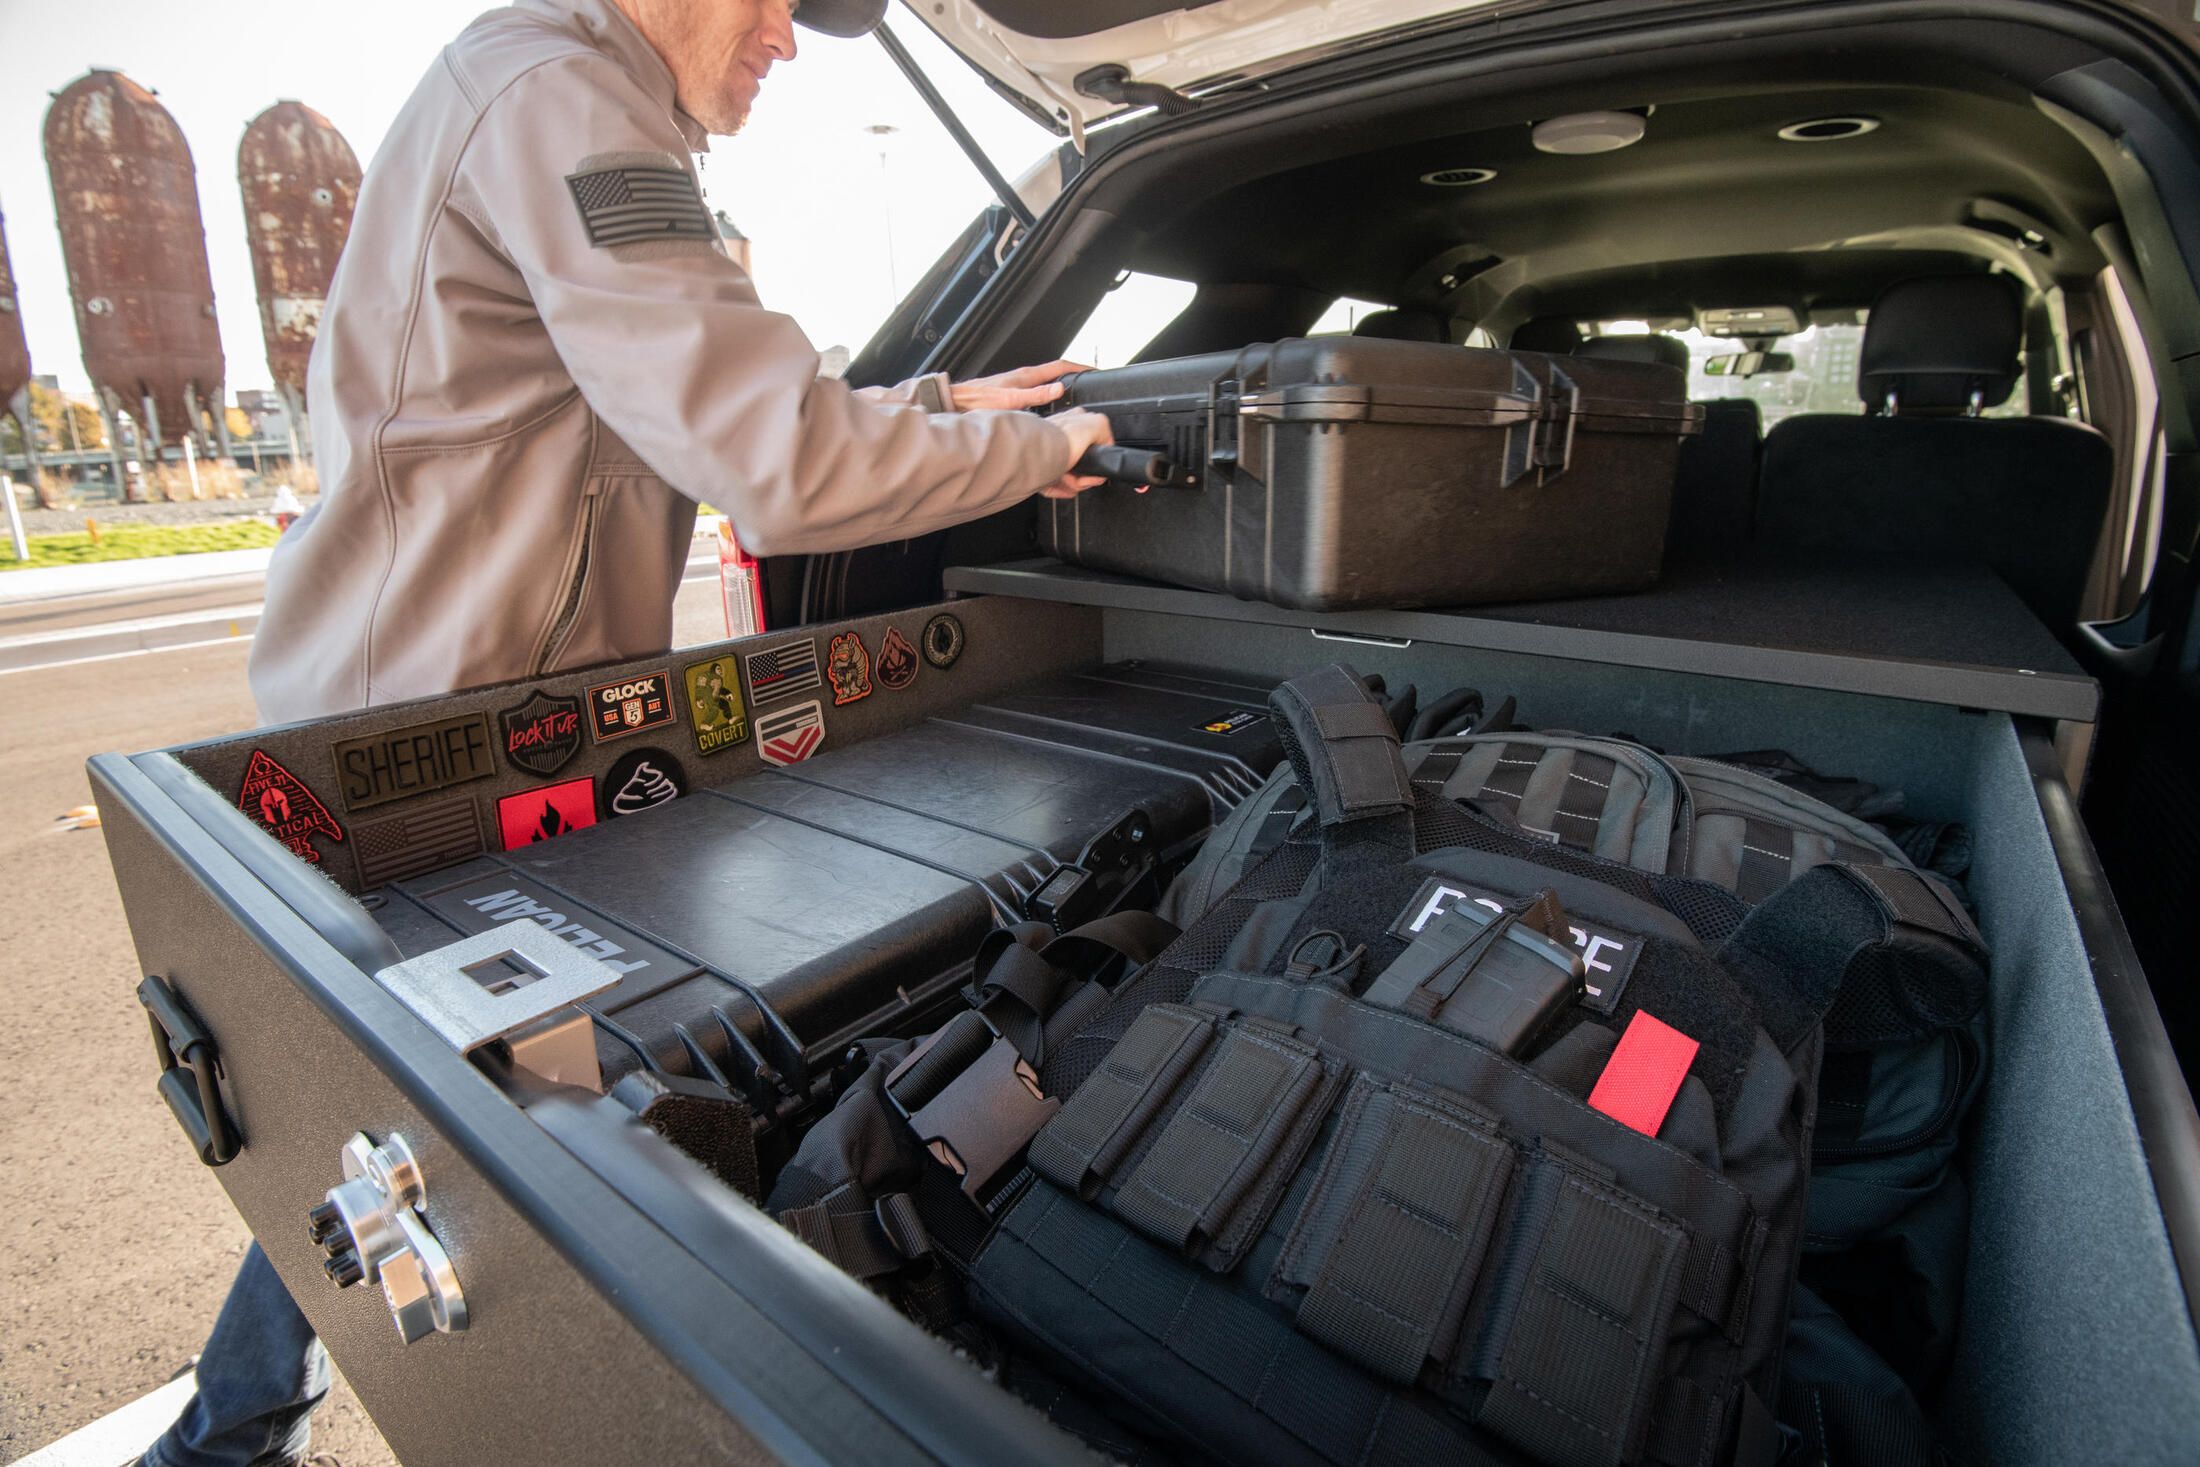 1 Drawer magnum TruckVault with tactical gear.